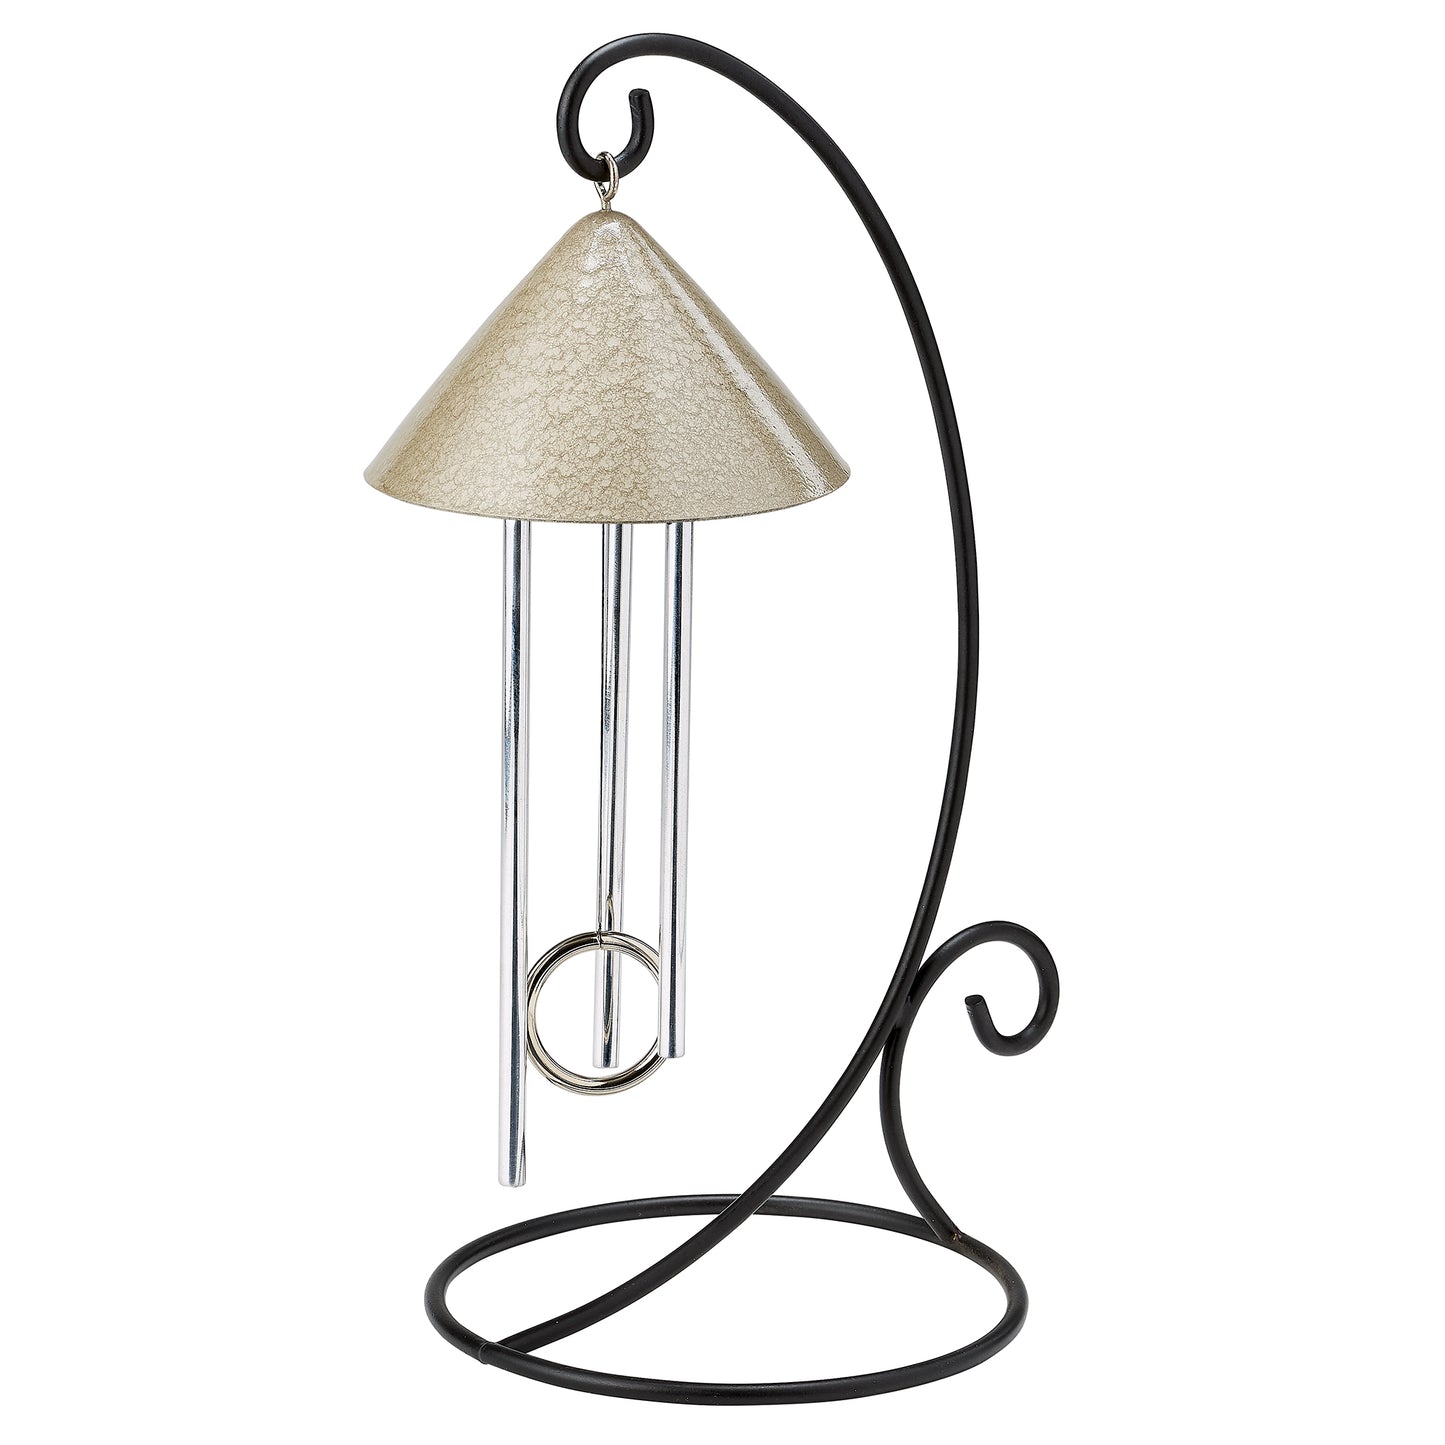 Indoor Tabletop solar wind chime in champagne color made in US